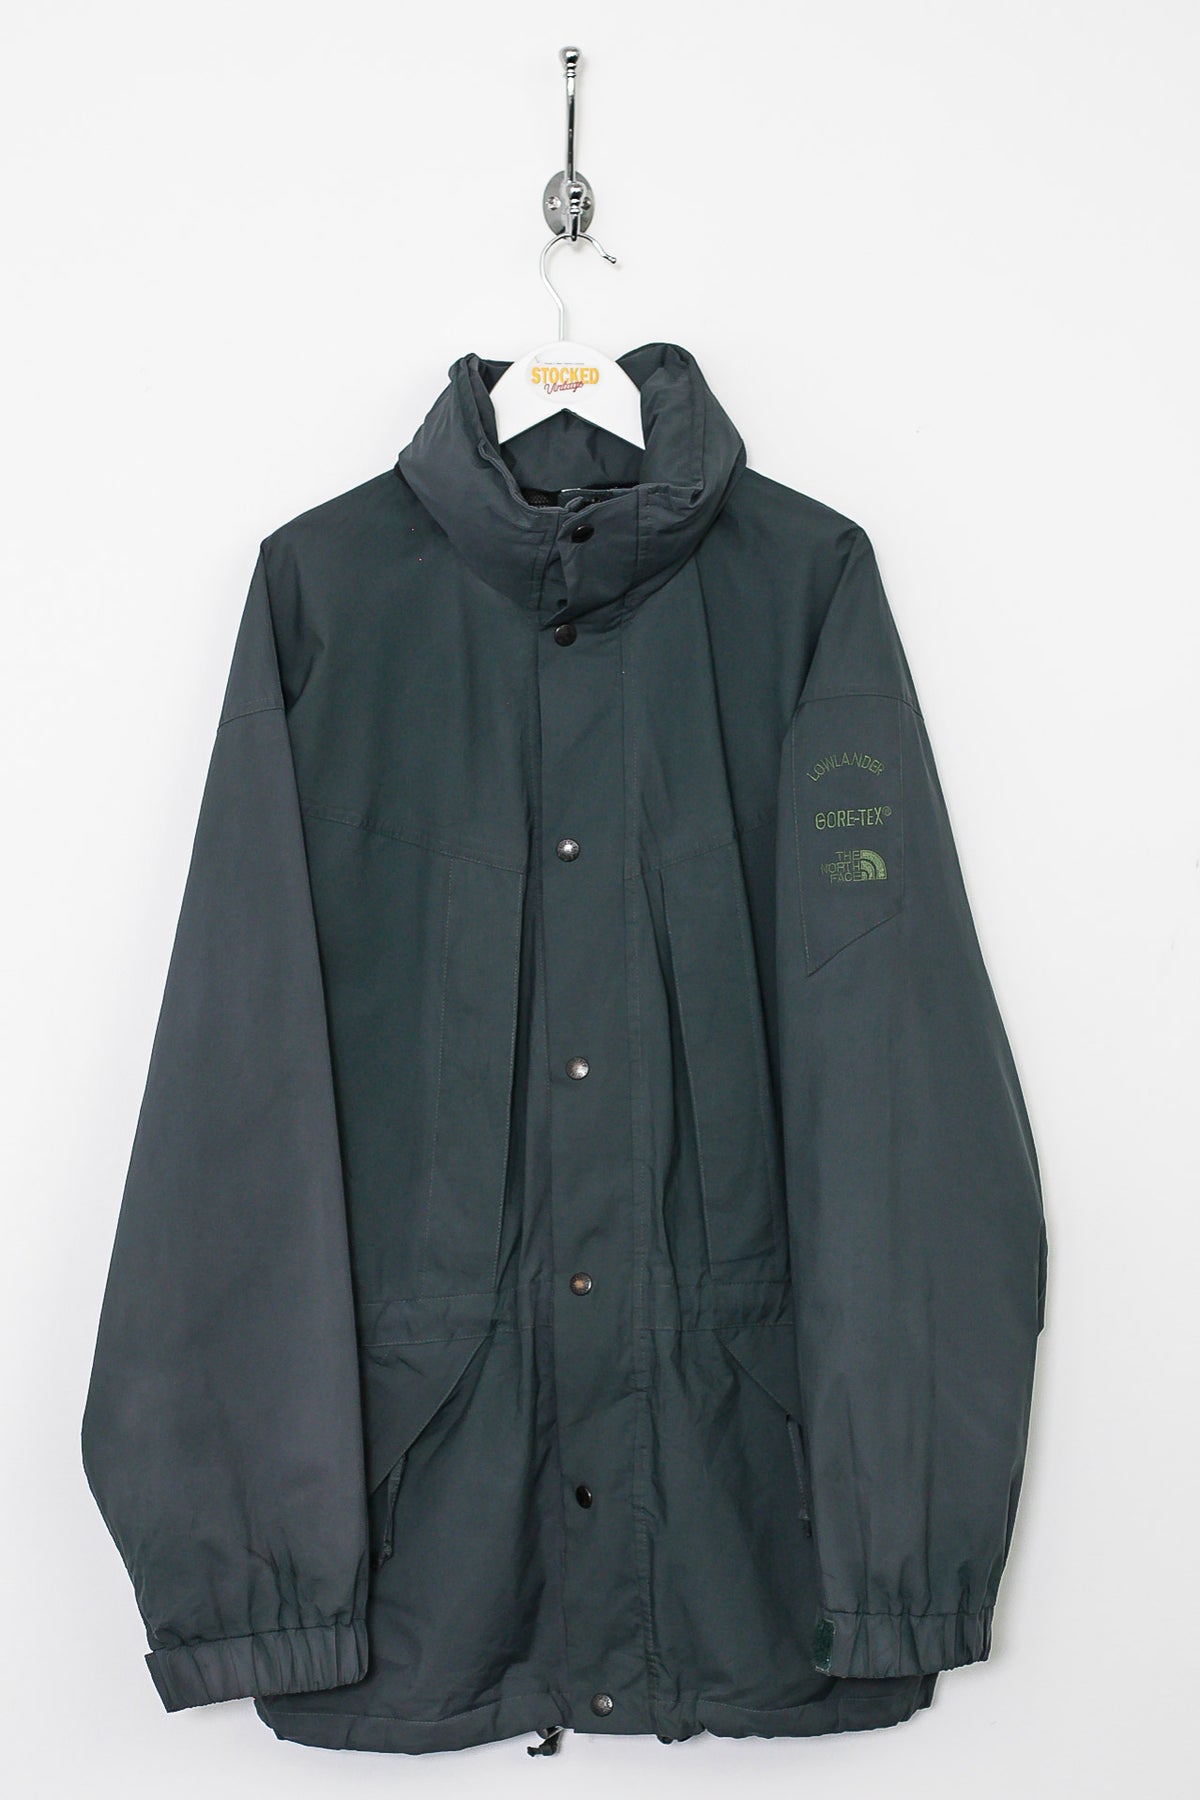 90s The North Face Lowlander Gore-Tex Jacket (L)